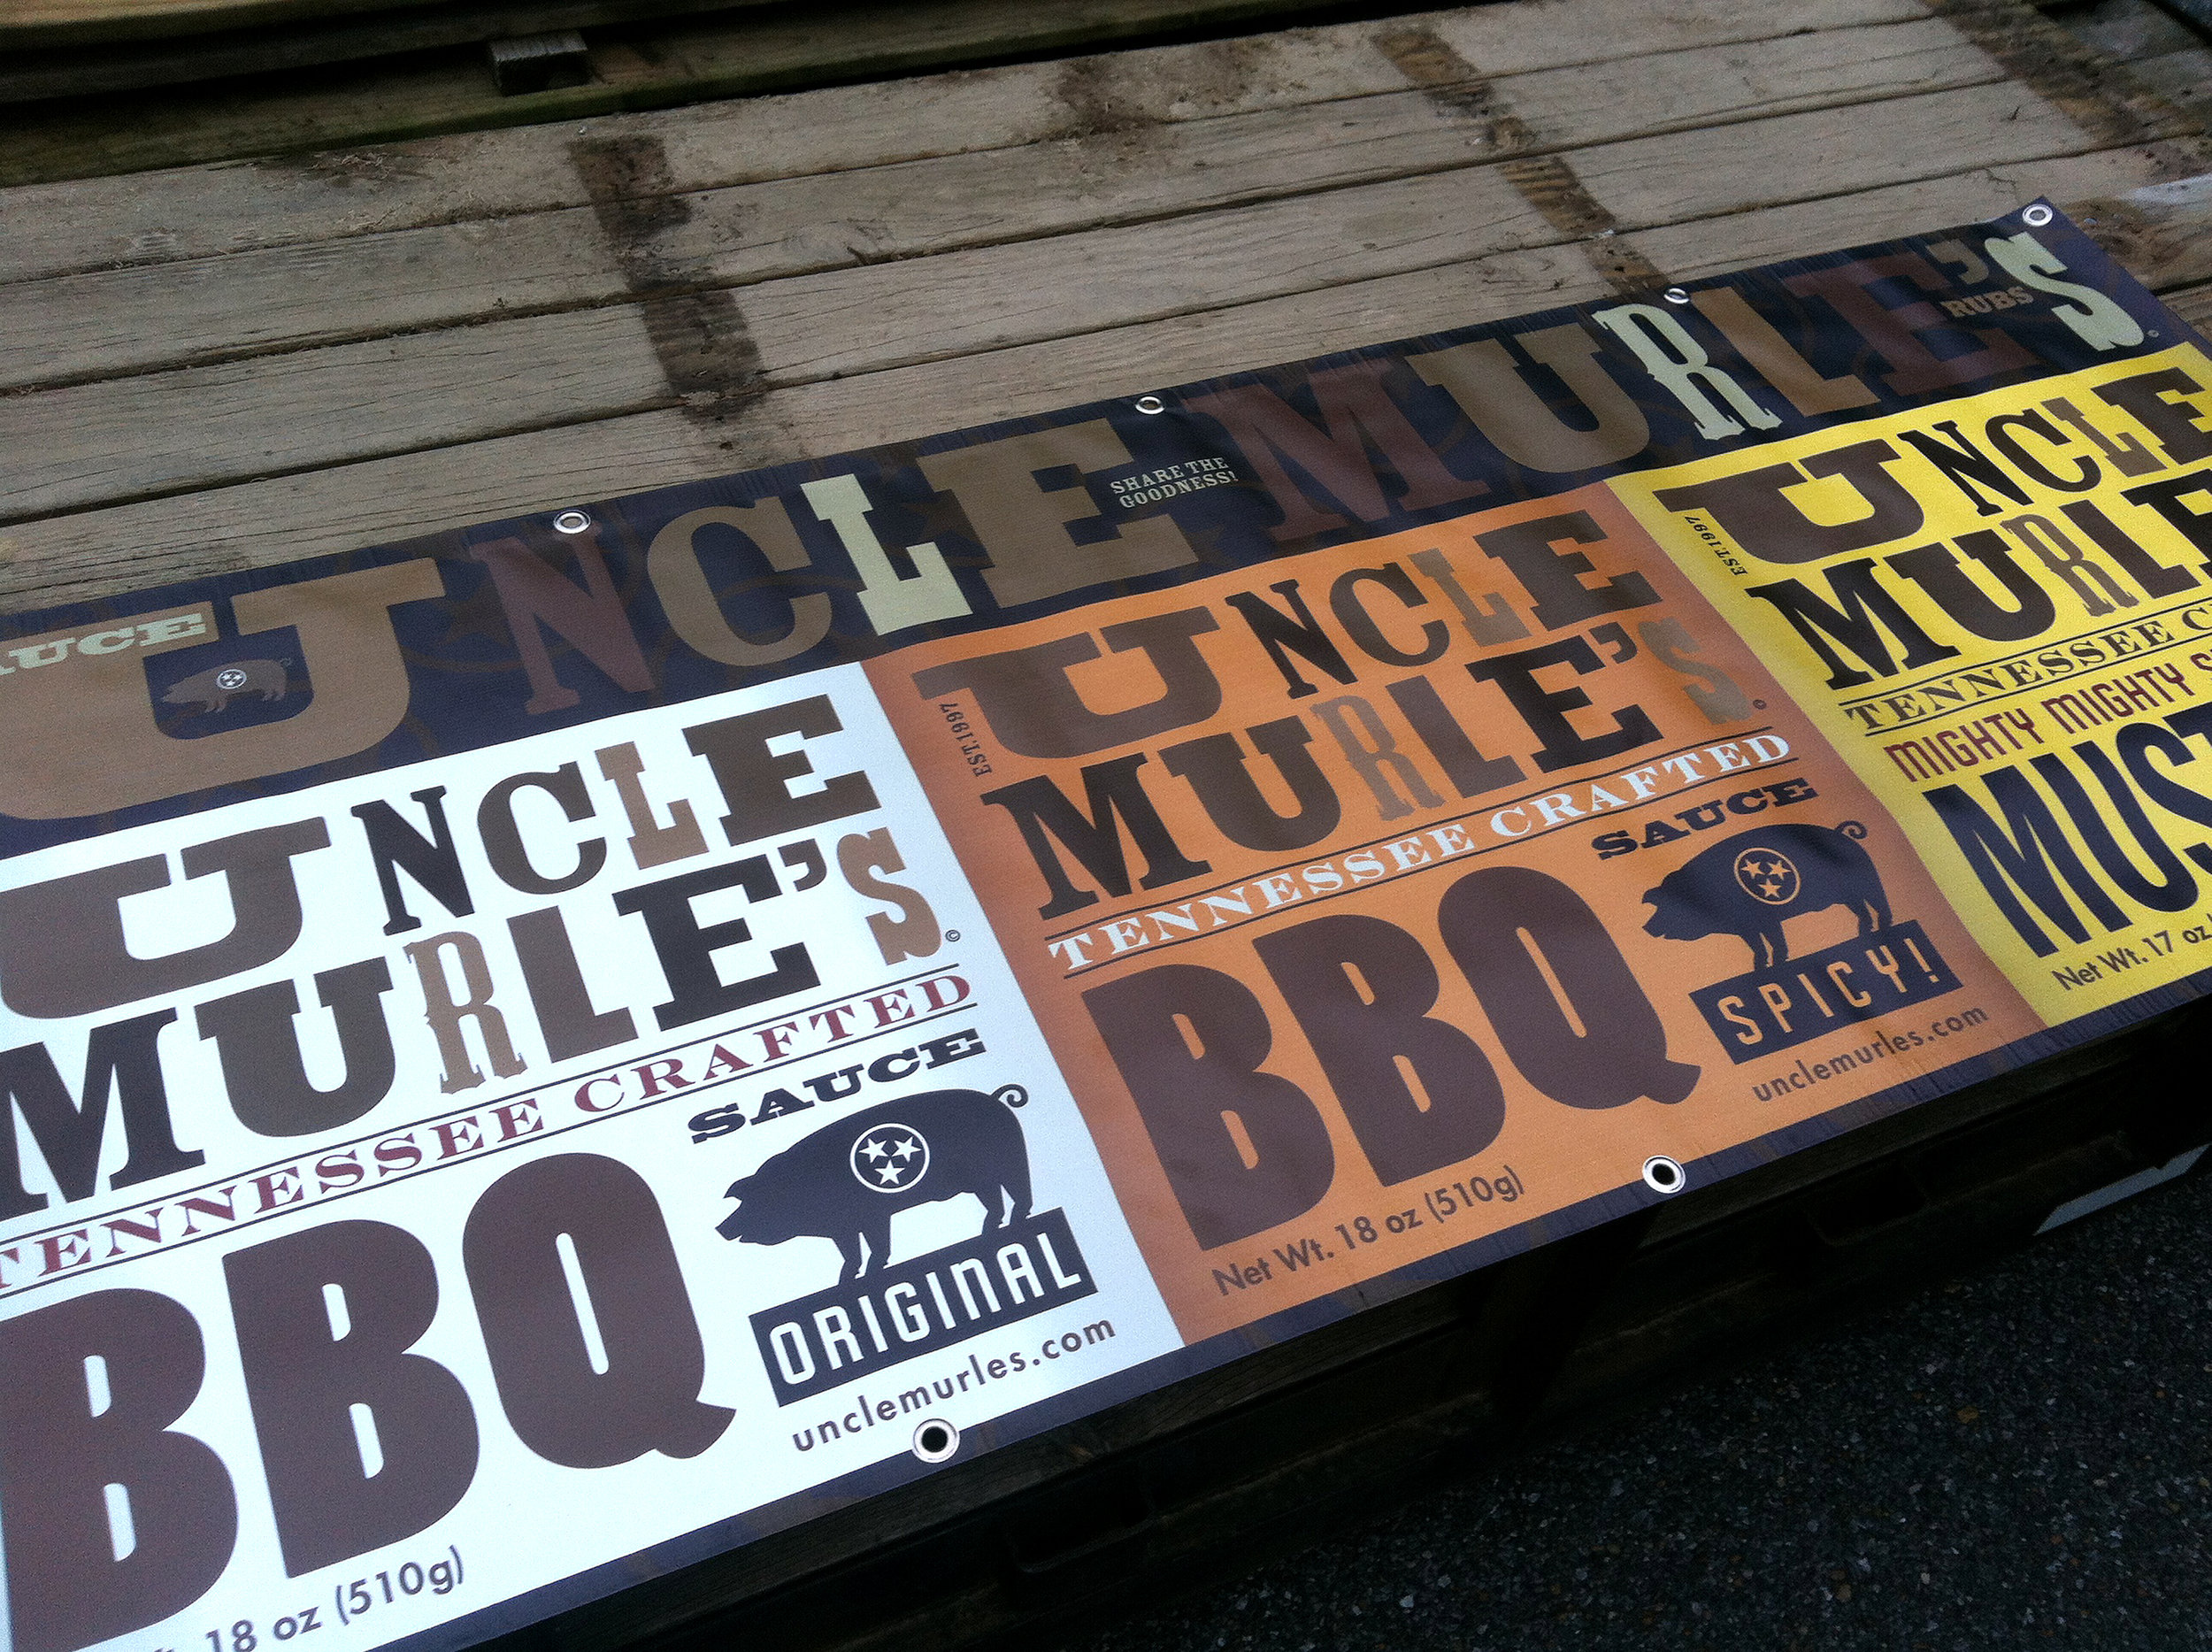  Uncle Murle’s BBQ team event graphics  Branding creative and design by Chuck Mitchell 